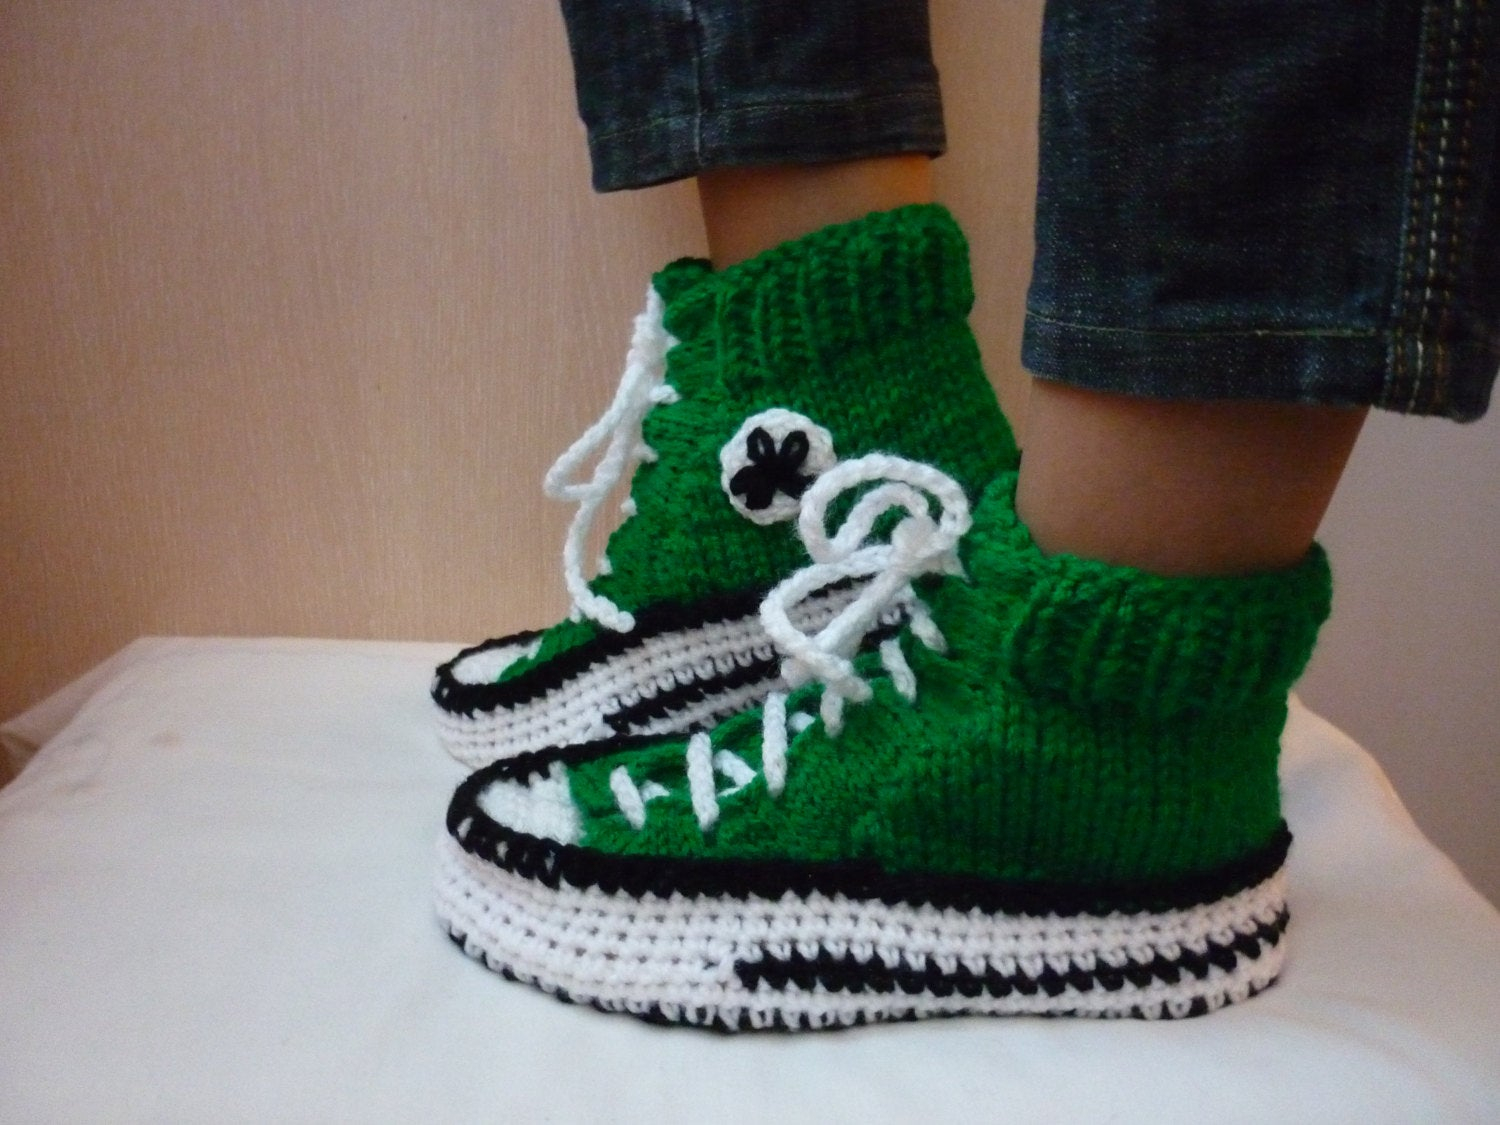 Converse Knitted Slippers Pattern Crochet Pattern Converse Slippers Knitted Pattern Slippers Crochet Pattern Converse Knitted Pattern Converse Woman Converse Slippers